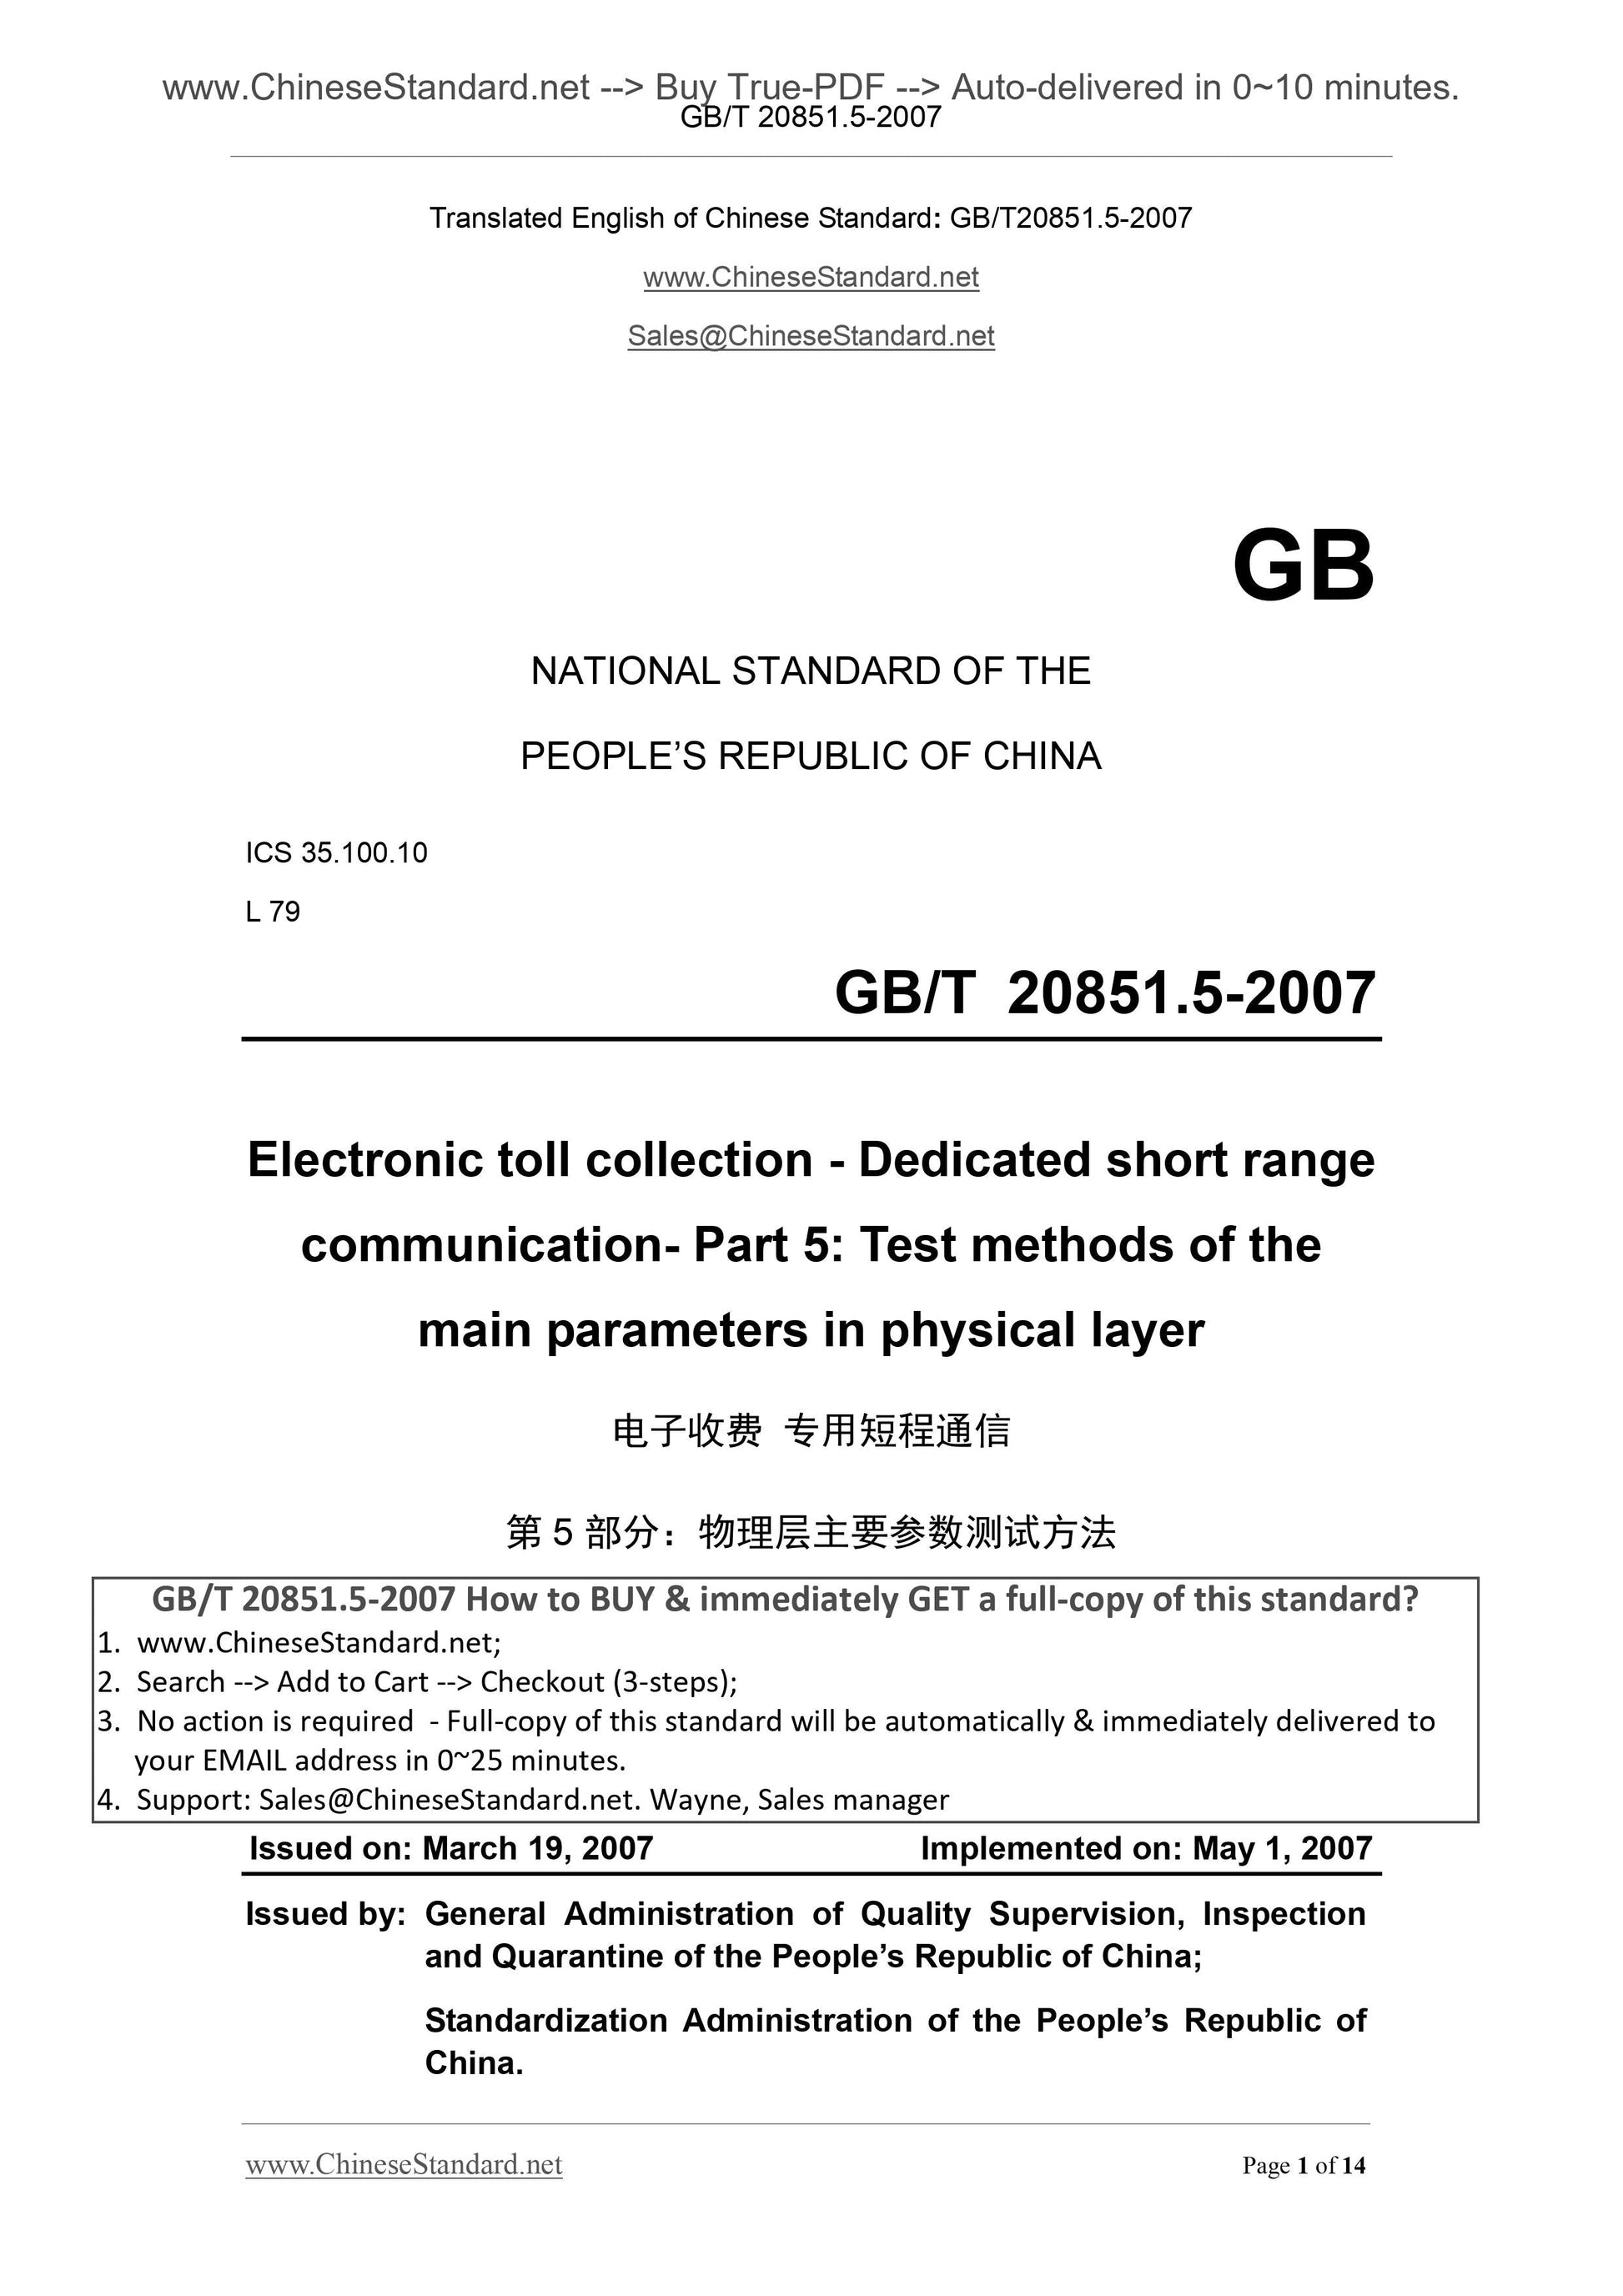 GB/T 20851.5-2007 Page 1